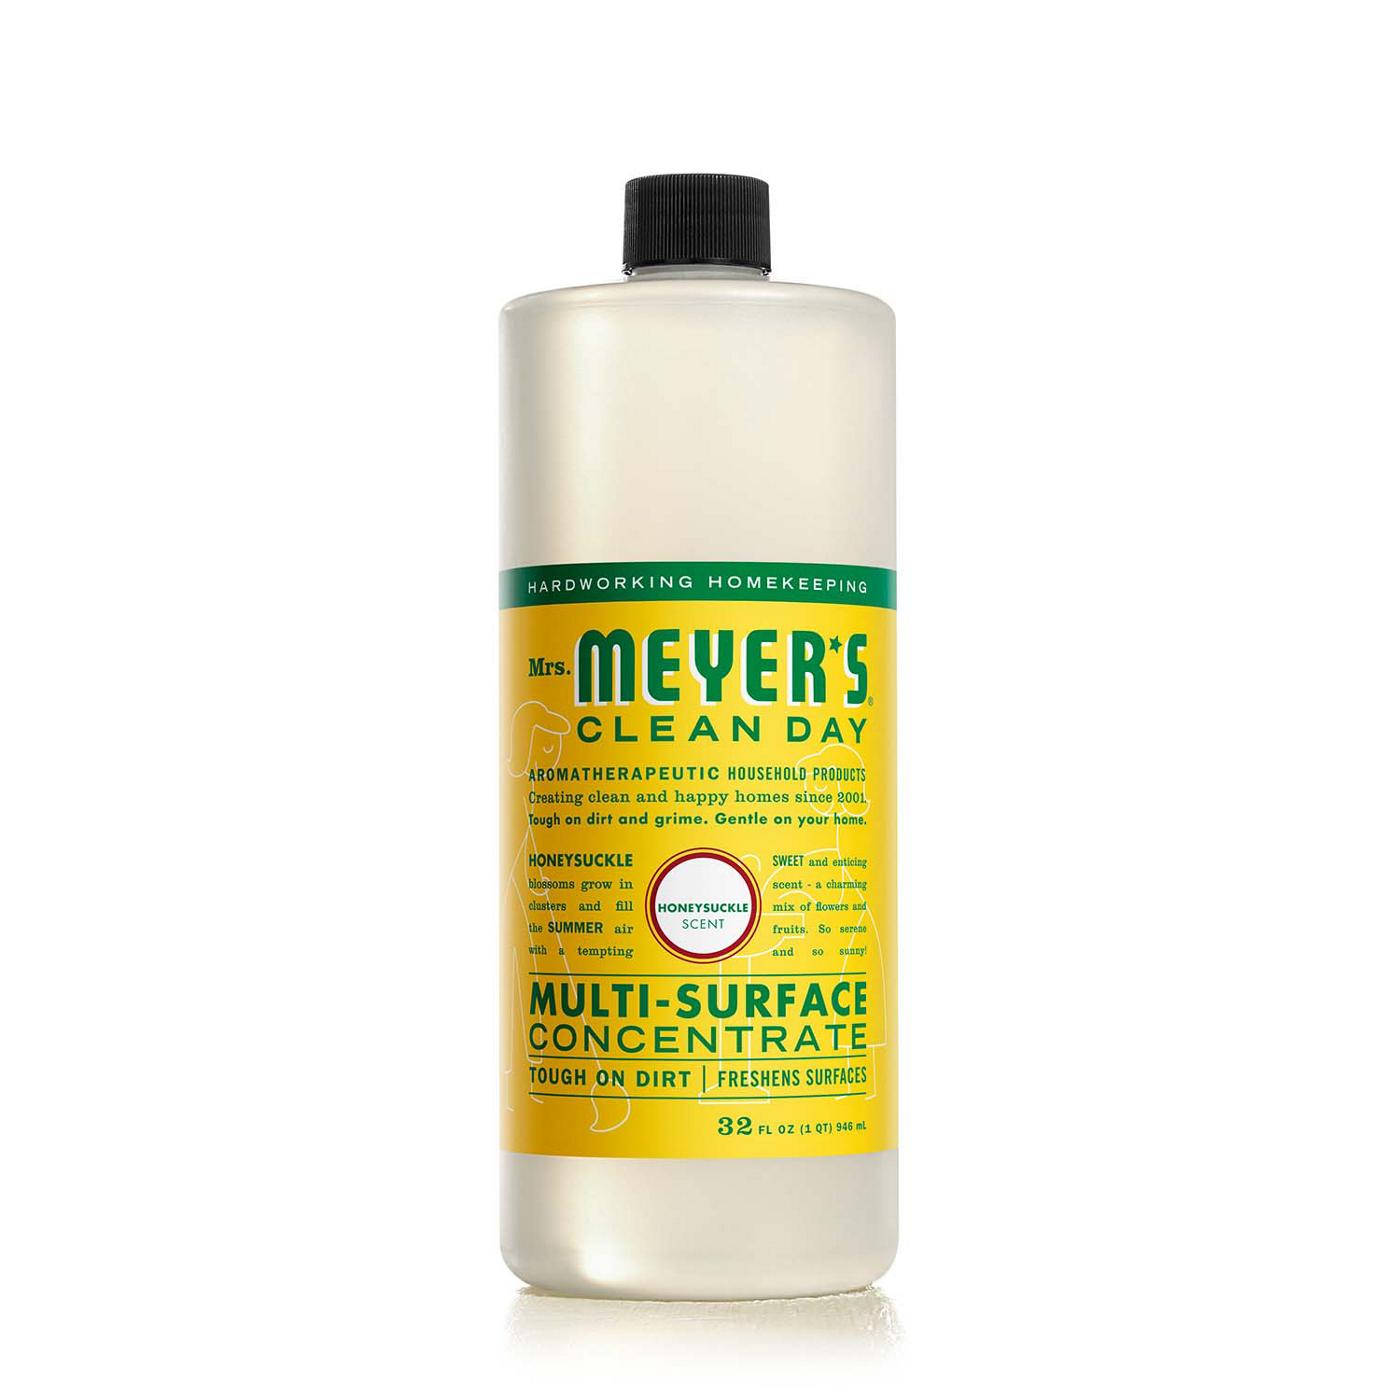 Mrs. Meyer's Clean Day Honeysuckle Scent All Purpose Cleaner; image 1 of 6